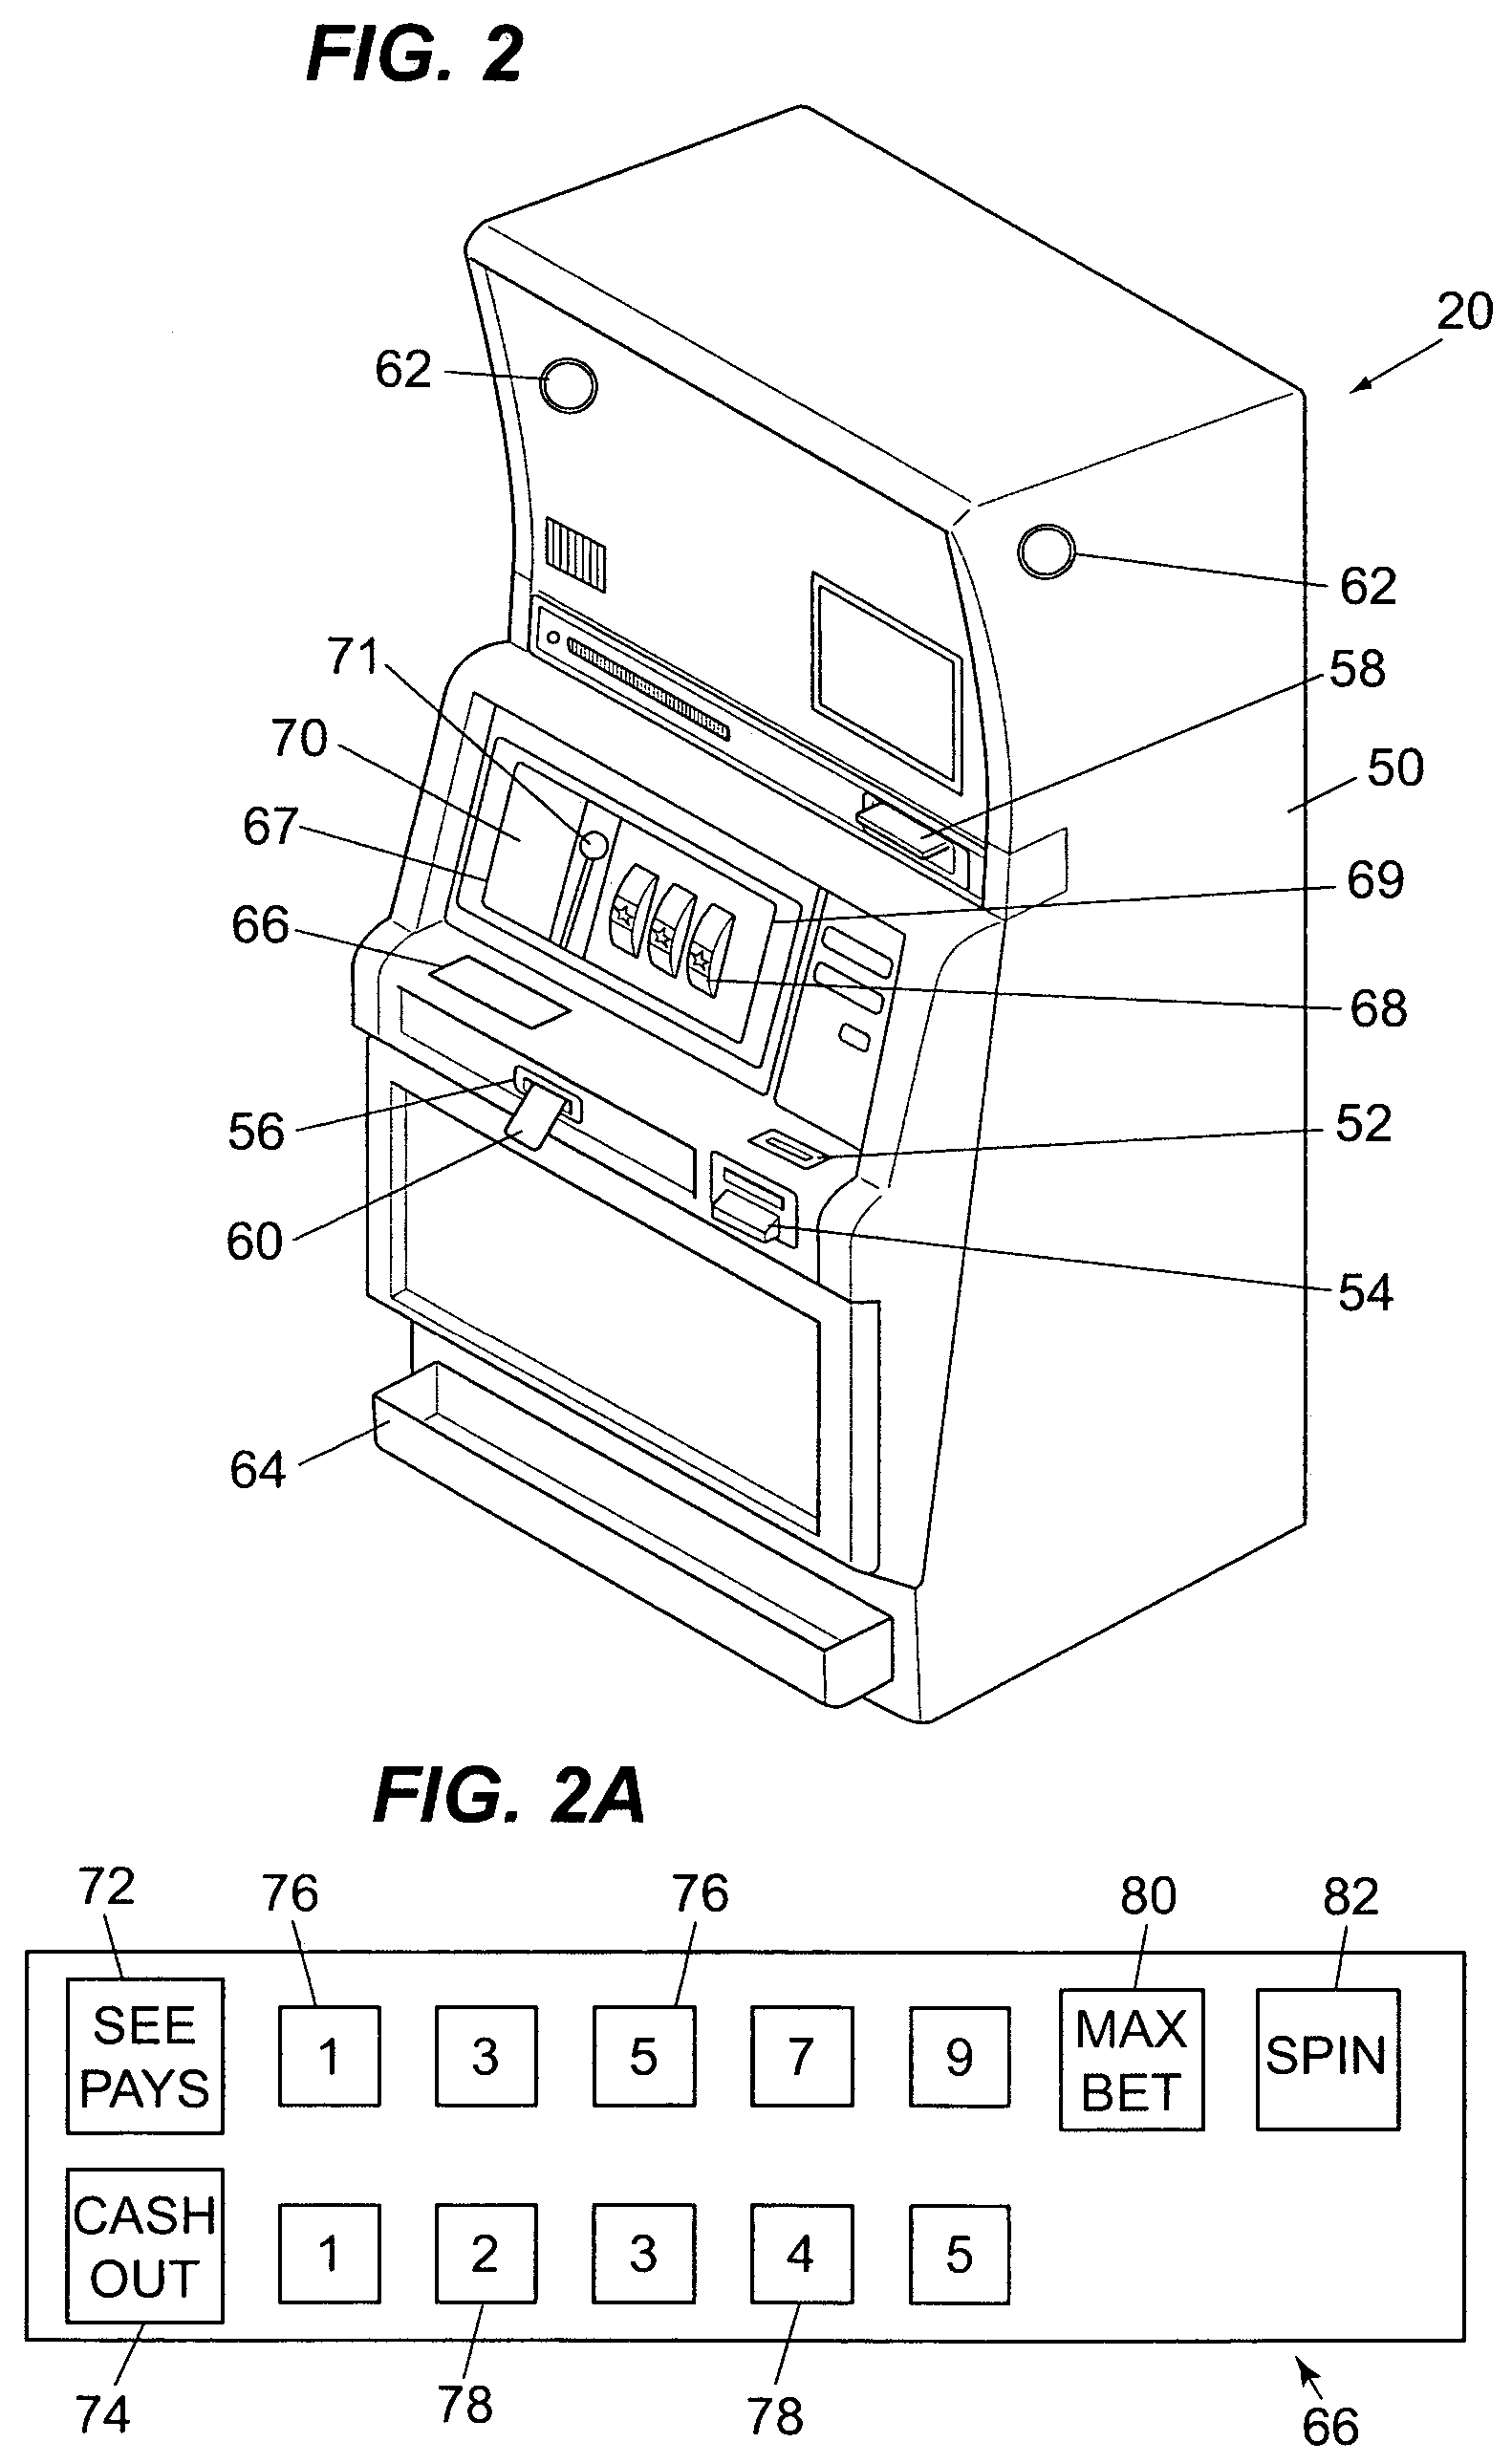 Method for using a light valve to reduce the visibility of an object within a gaming apparatus